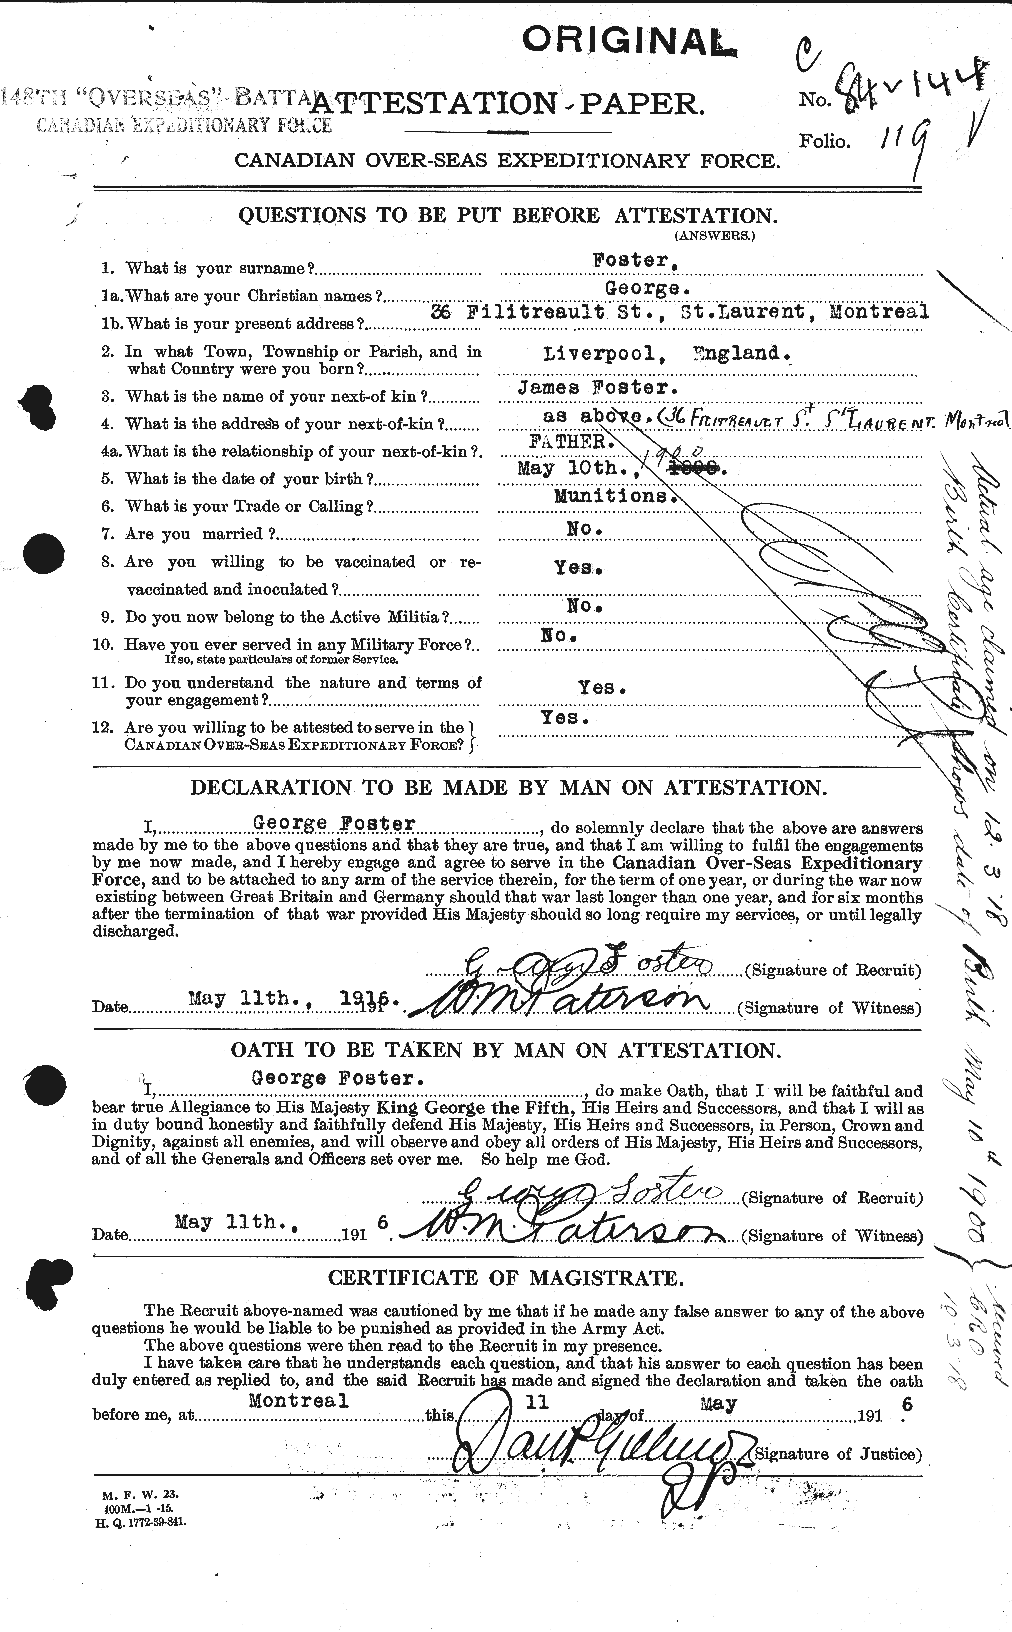 Personnel Records of the First World War - CEF 330662a